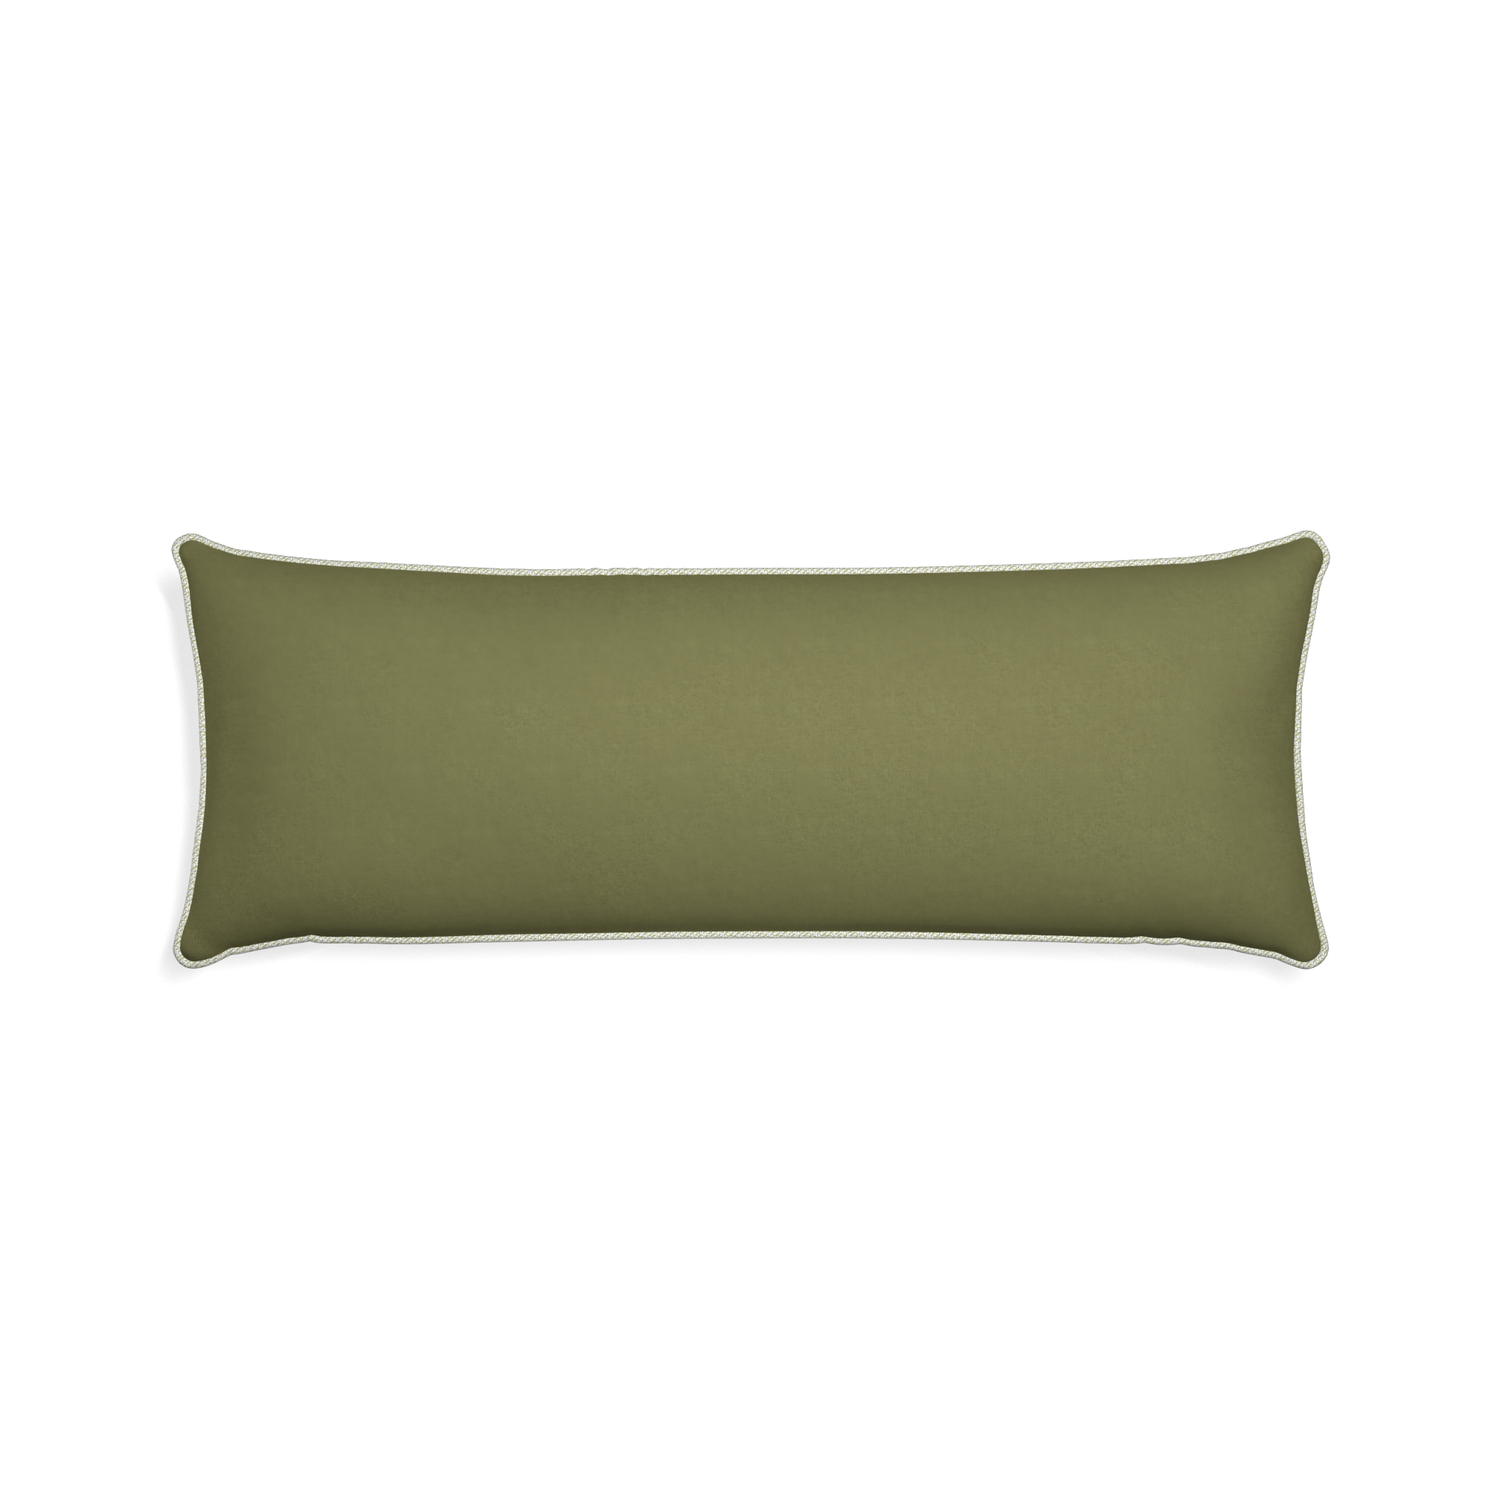 Xl-lumbar moss custom moss greenpillow with l piping on white background